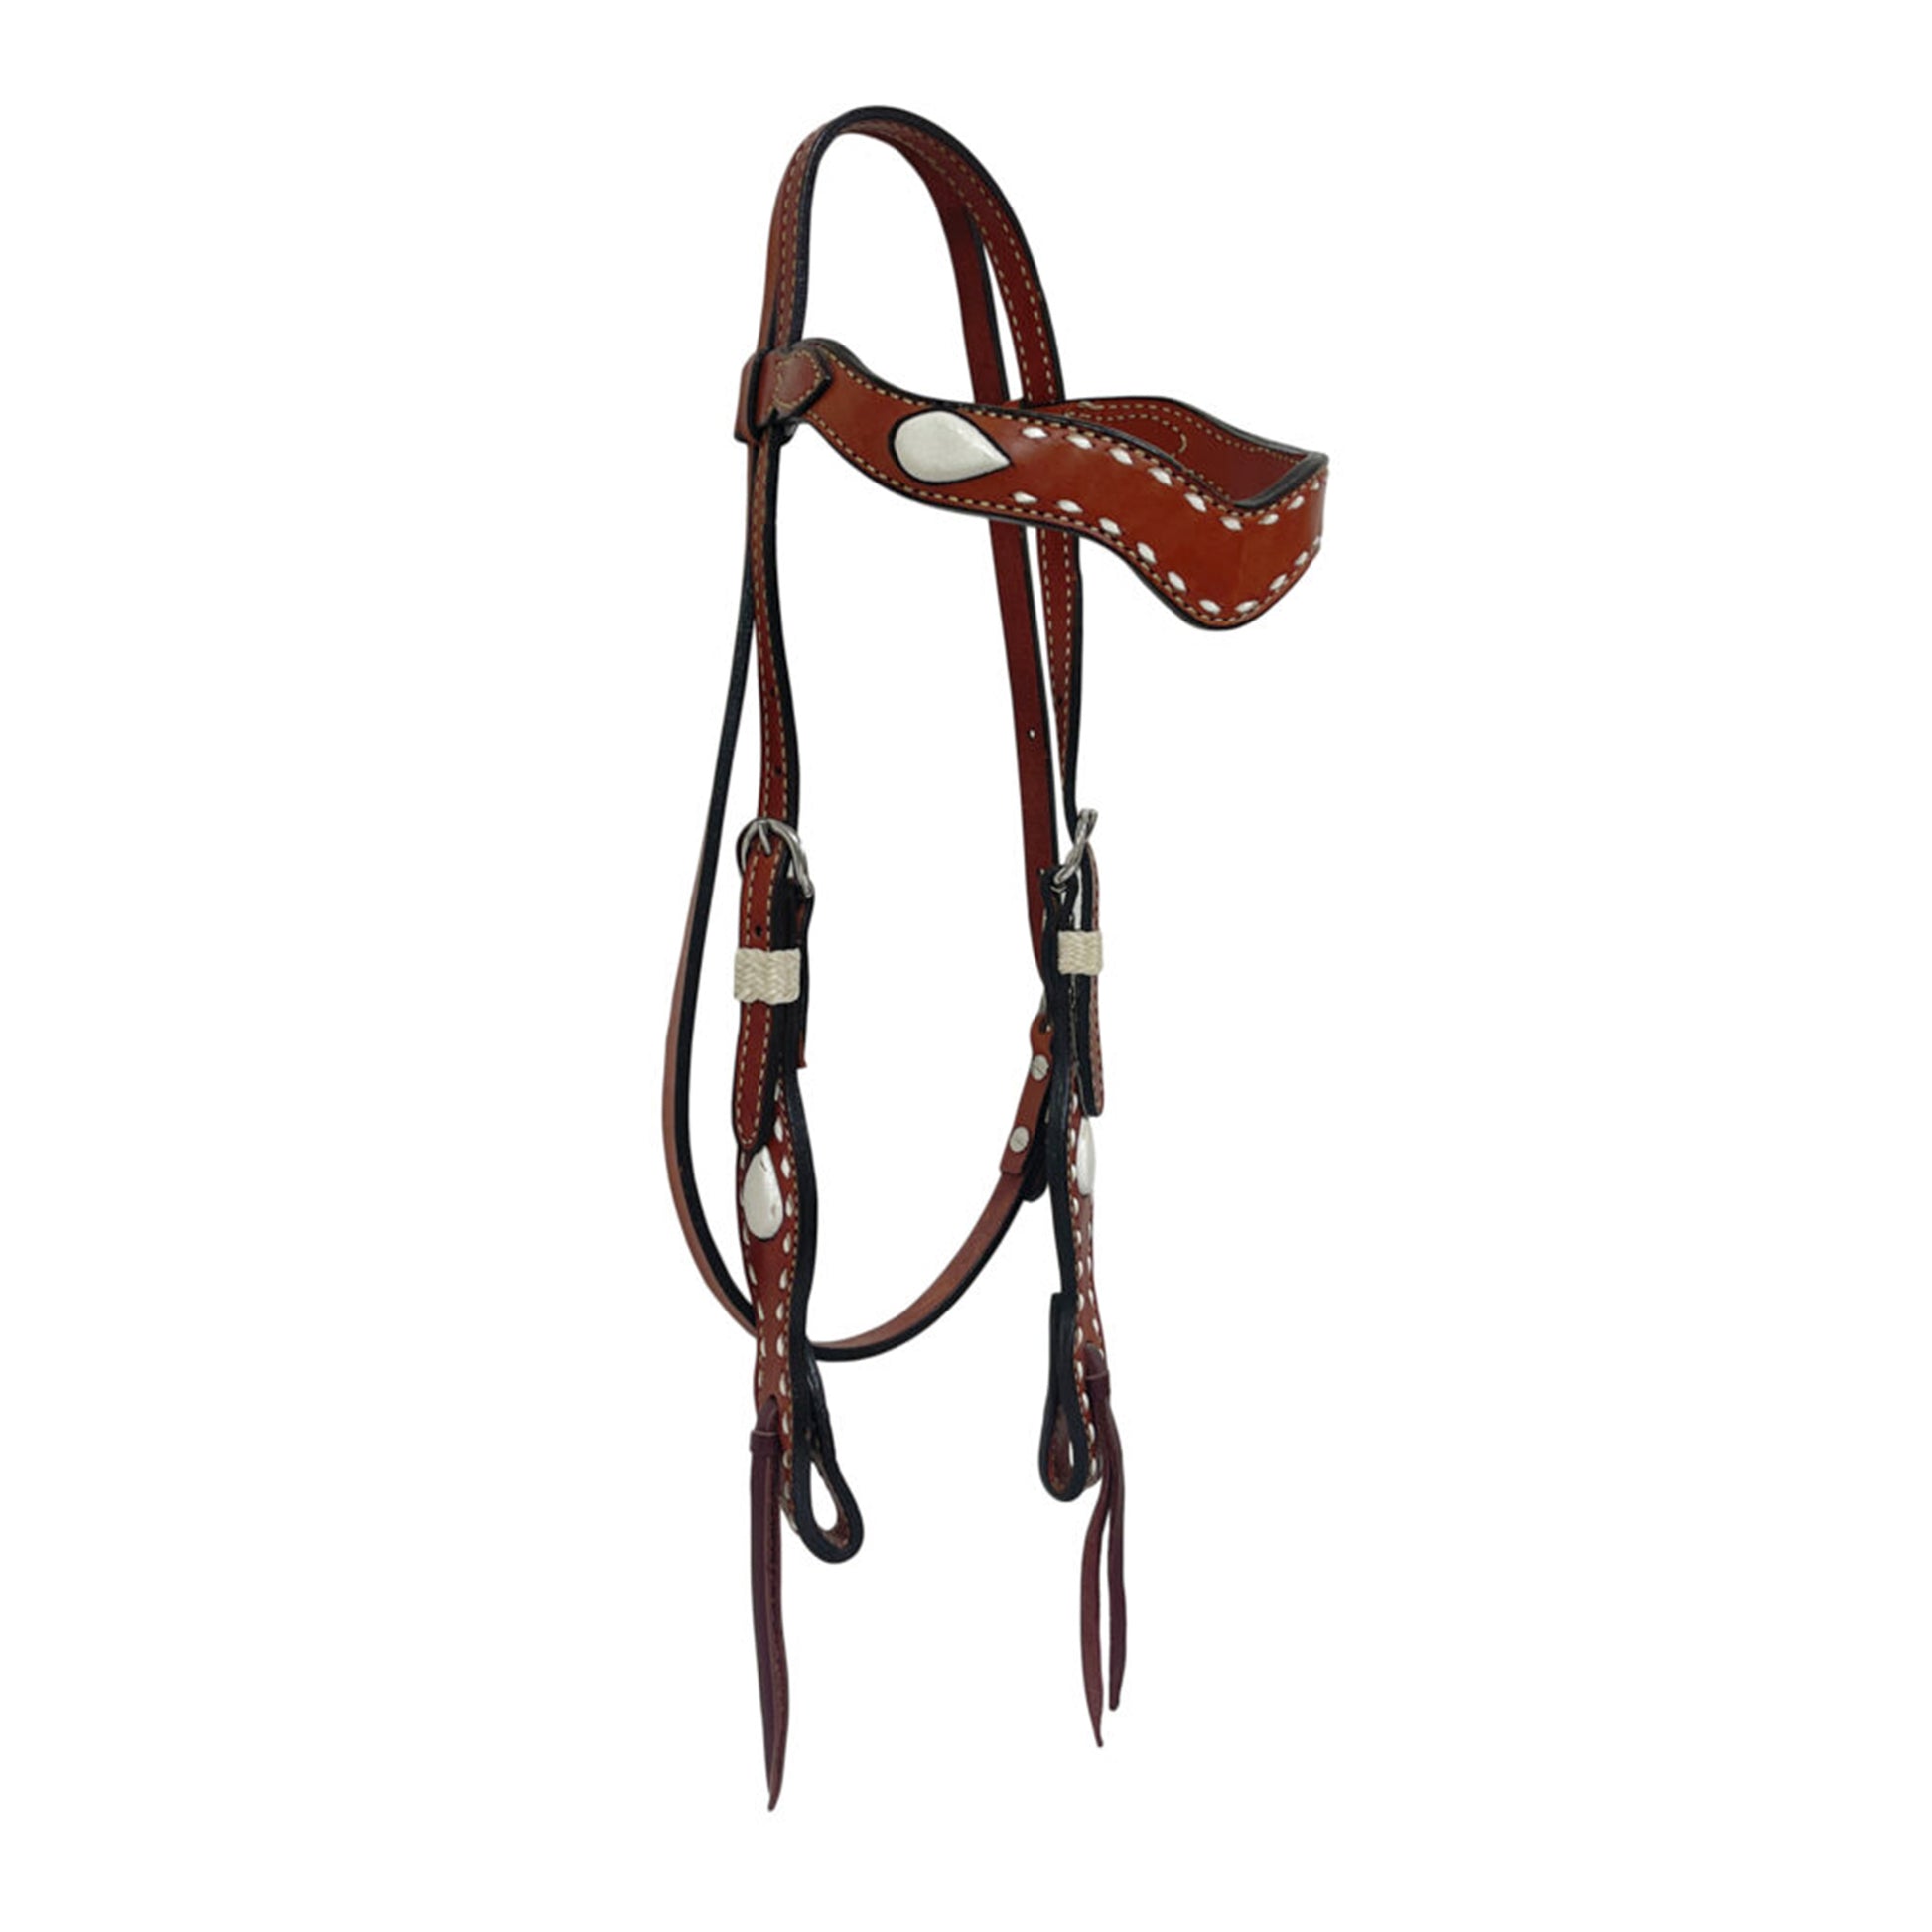 1-1/2" Wave browband headstall toast leather white inlay teardrop with white buckstitch and bleach rawhide loops.